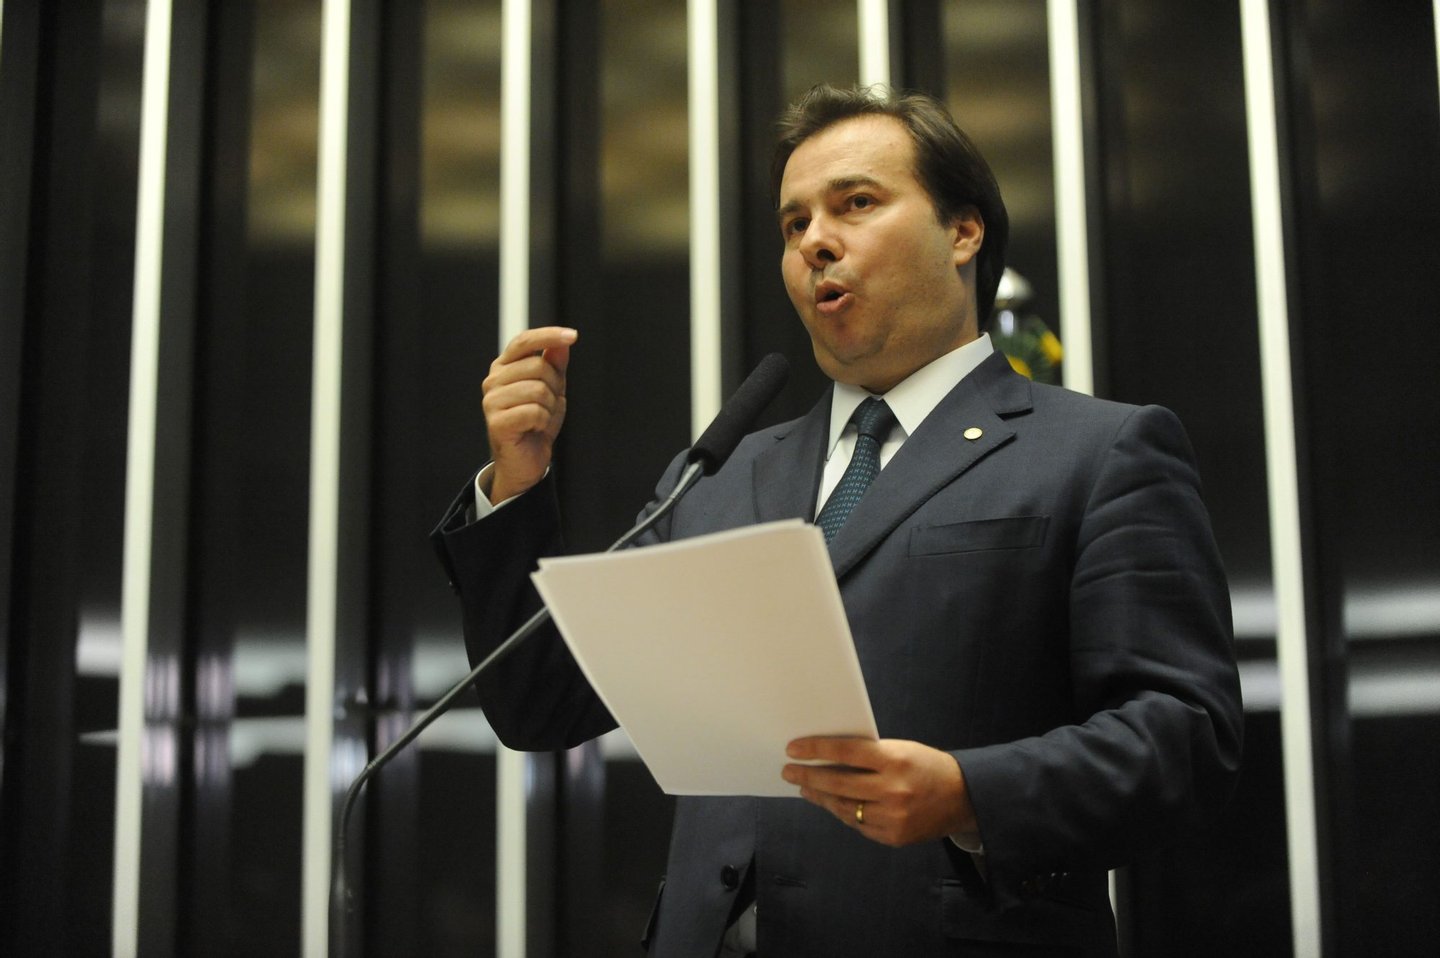 The candidate to the presidency of Brazil's Lower House Rodrigo Maia, of the Democrats party (DEM), speaks before the plenary during the vote for the post, at the Congress in Brasilia on July 13, 2016. / AFP / ANDRESSA ANHOLETE (Photo credit should read ANDRESSA ANHOLETE/AFP/Getty Images)